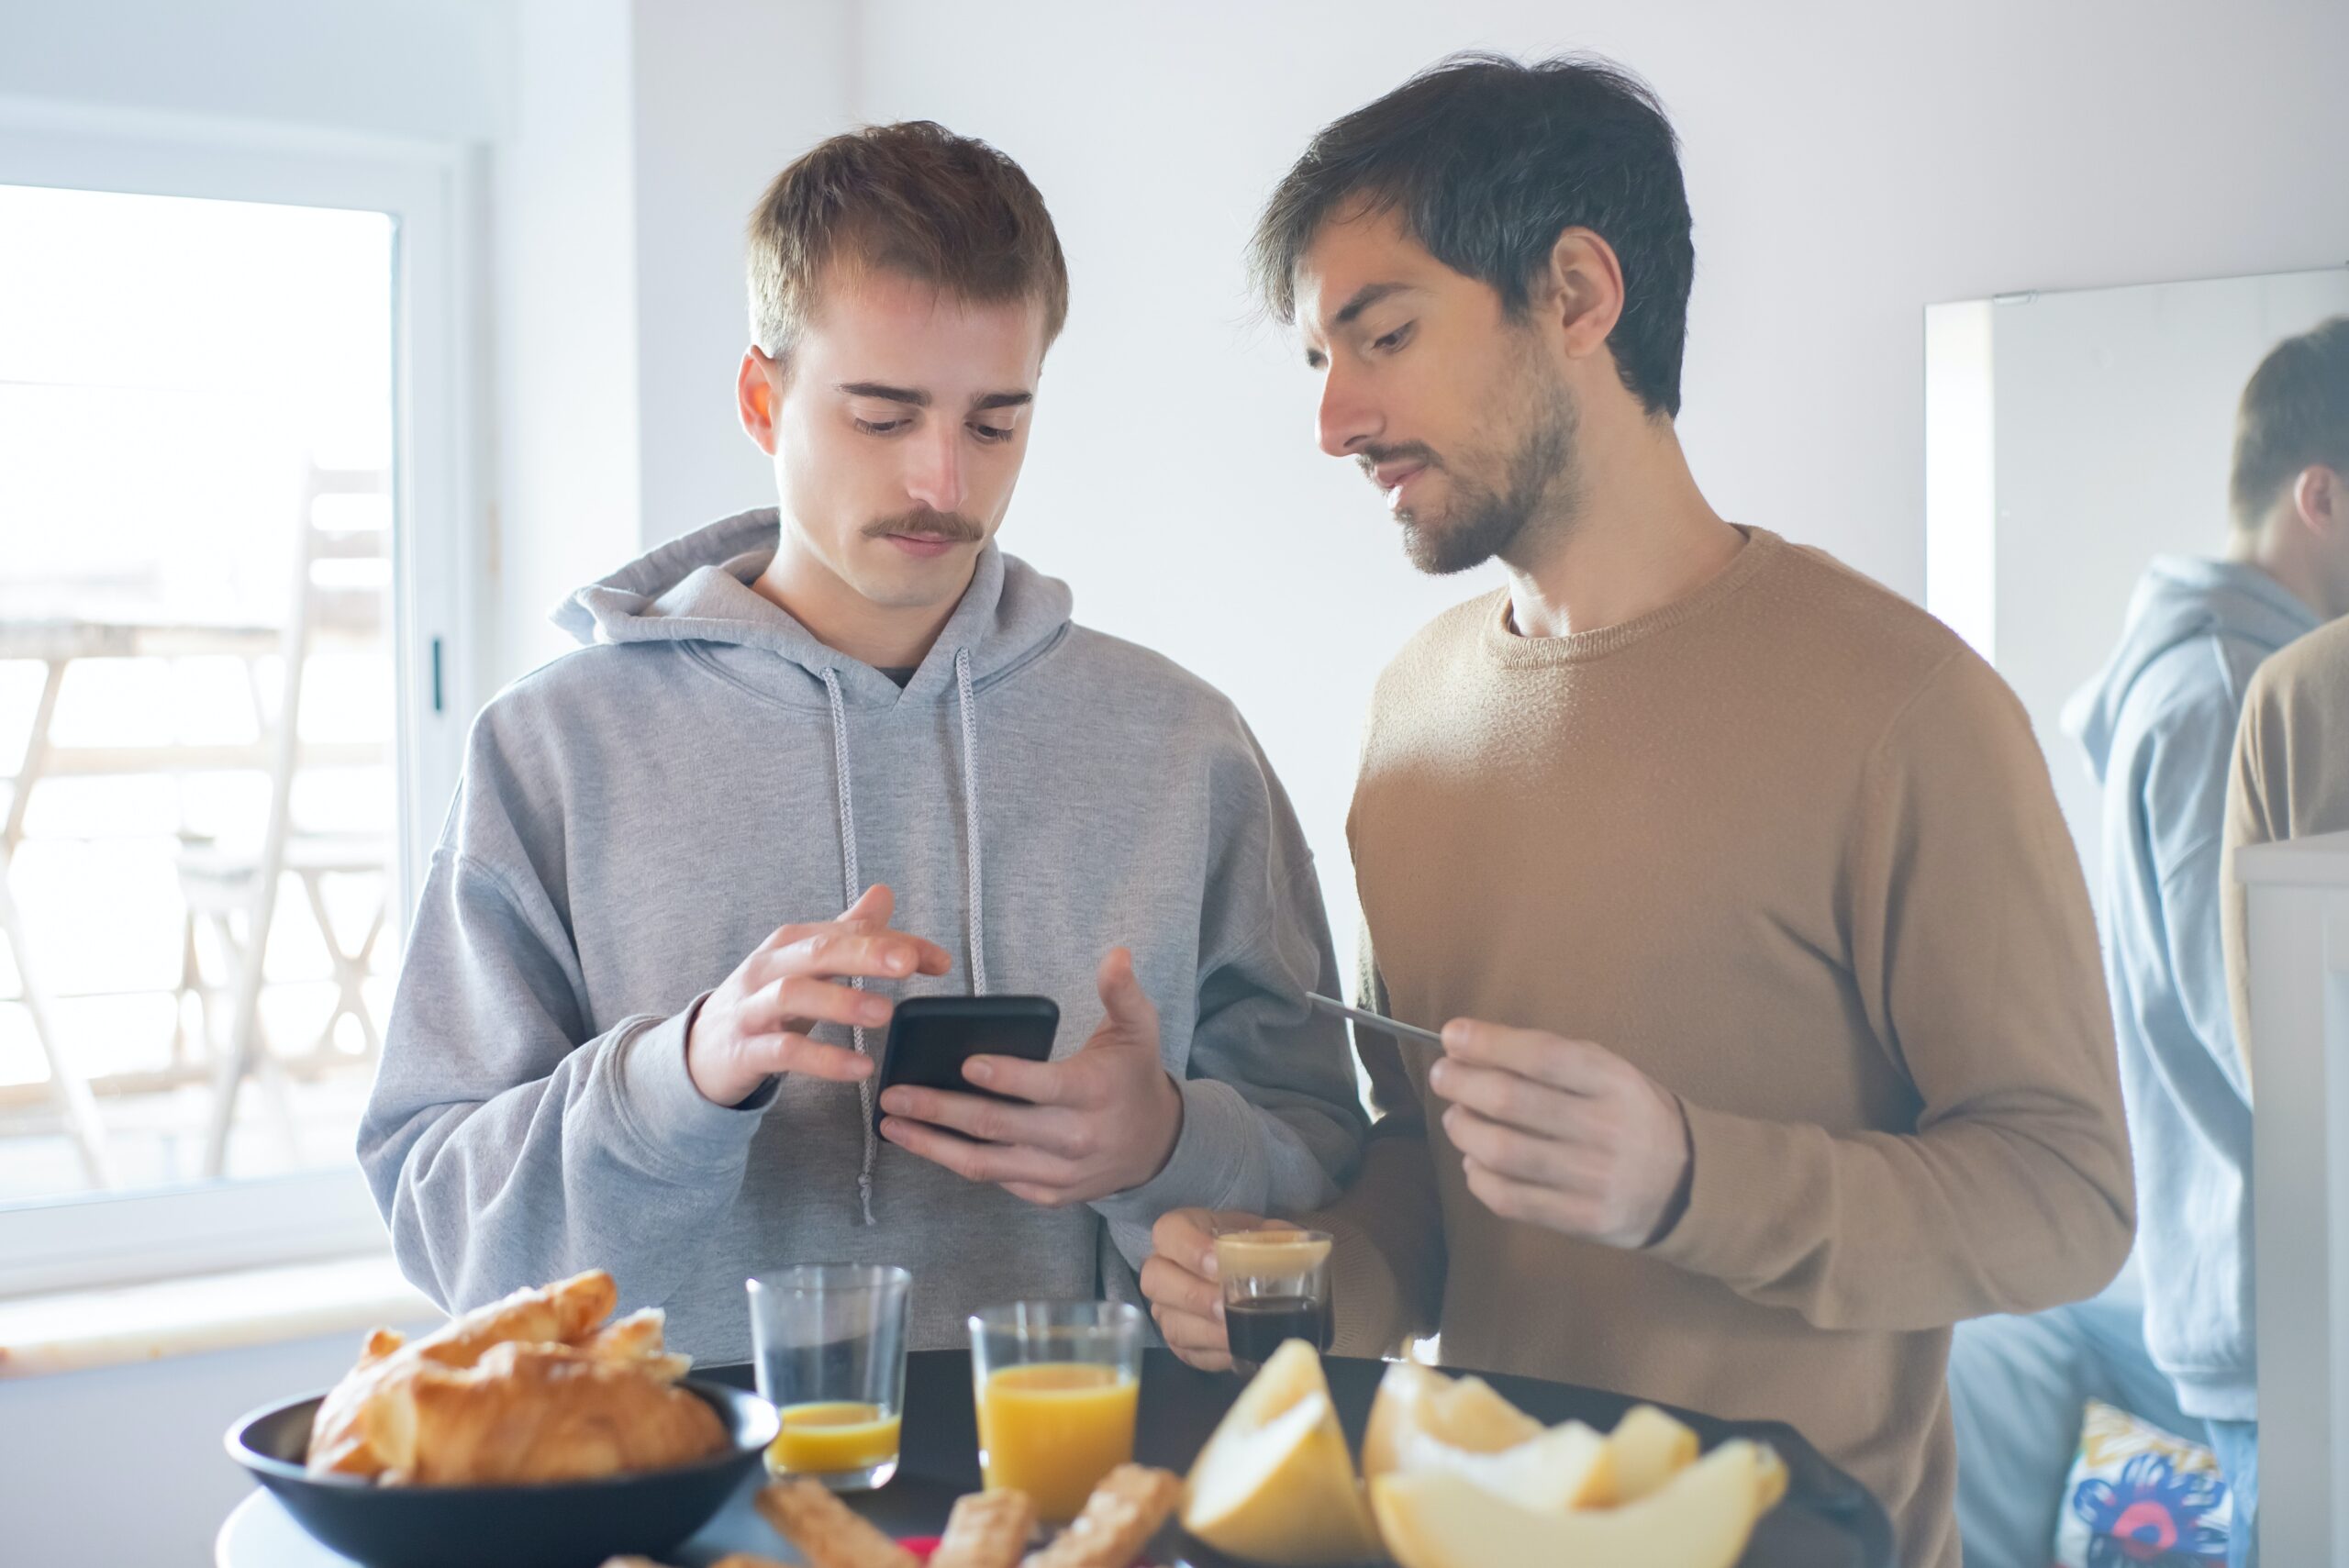 Two men stand behind a table with breakfast items on it. One man uses his smartphone and the other looks at him.